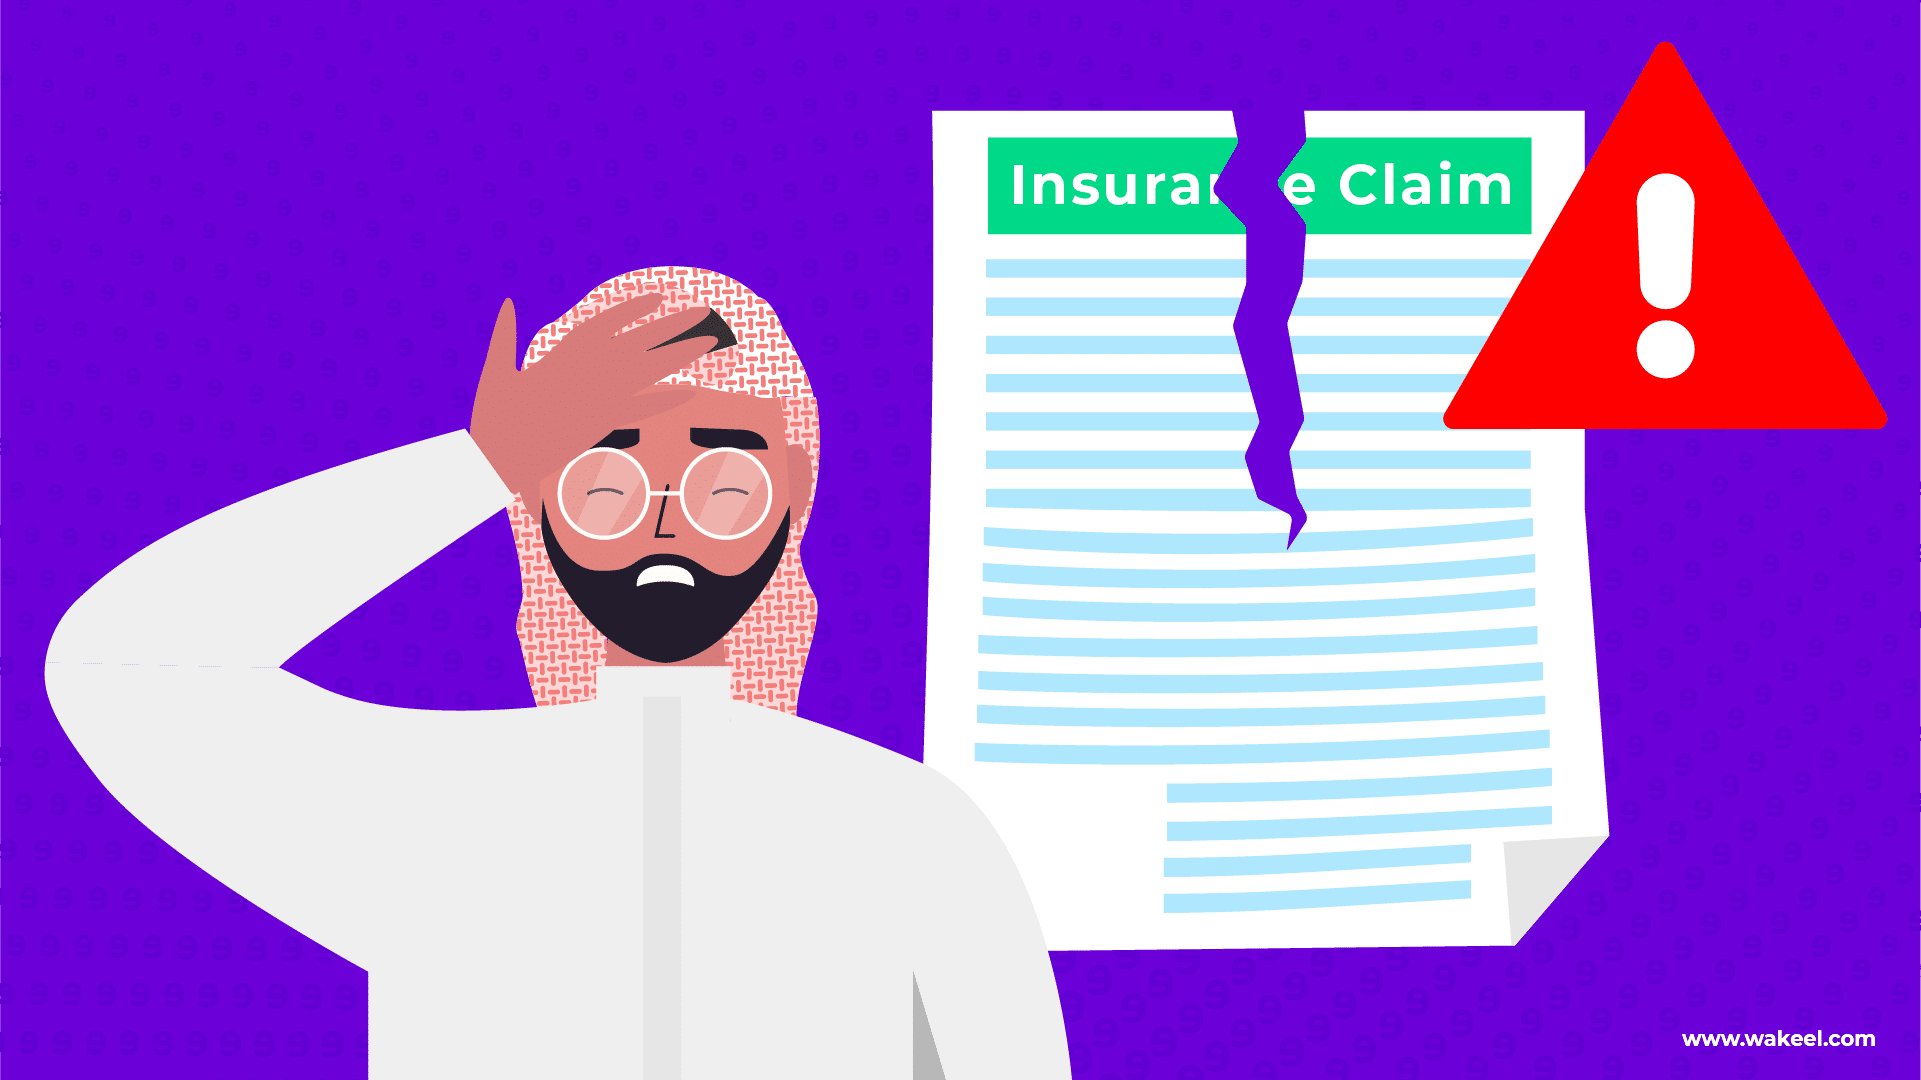 10 Things That Can Break an Insurance Contract